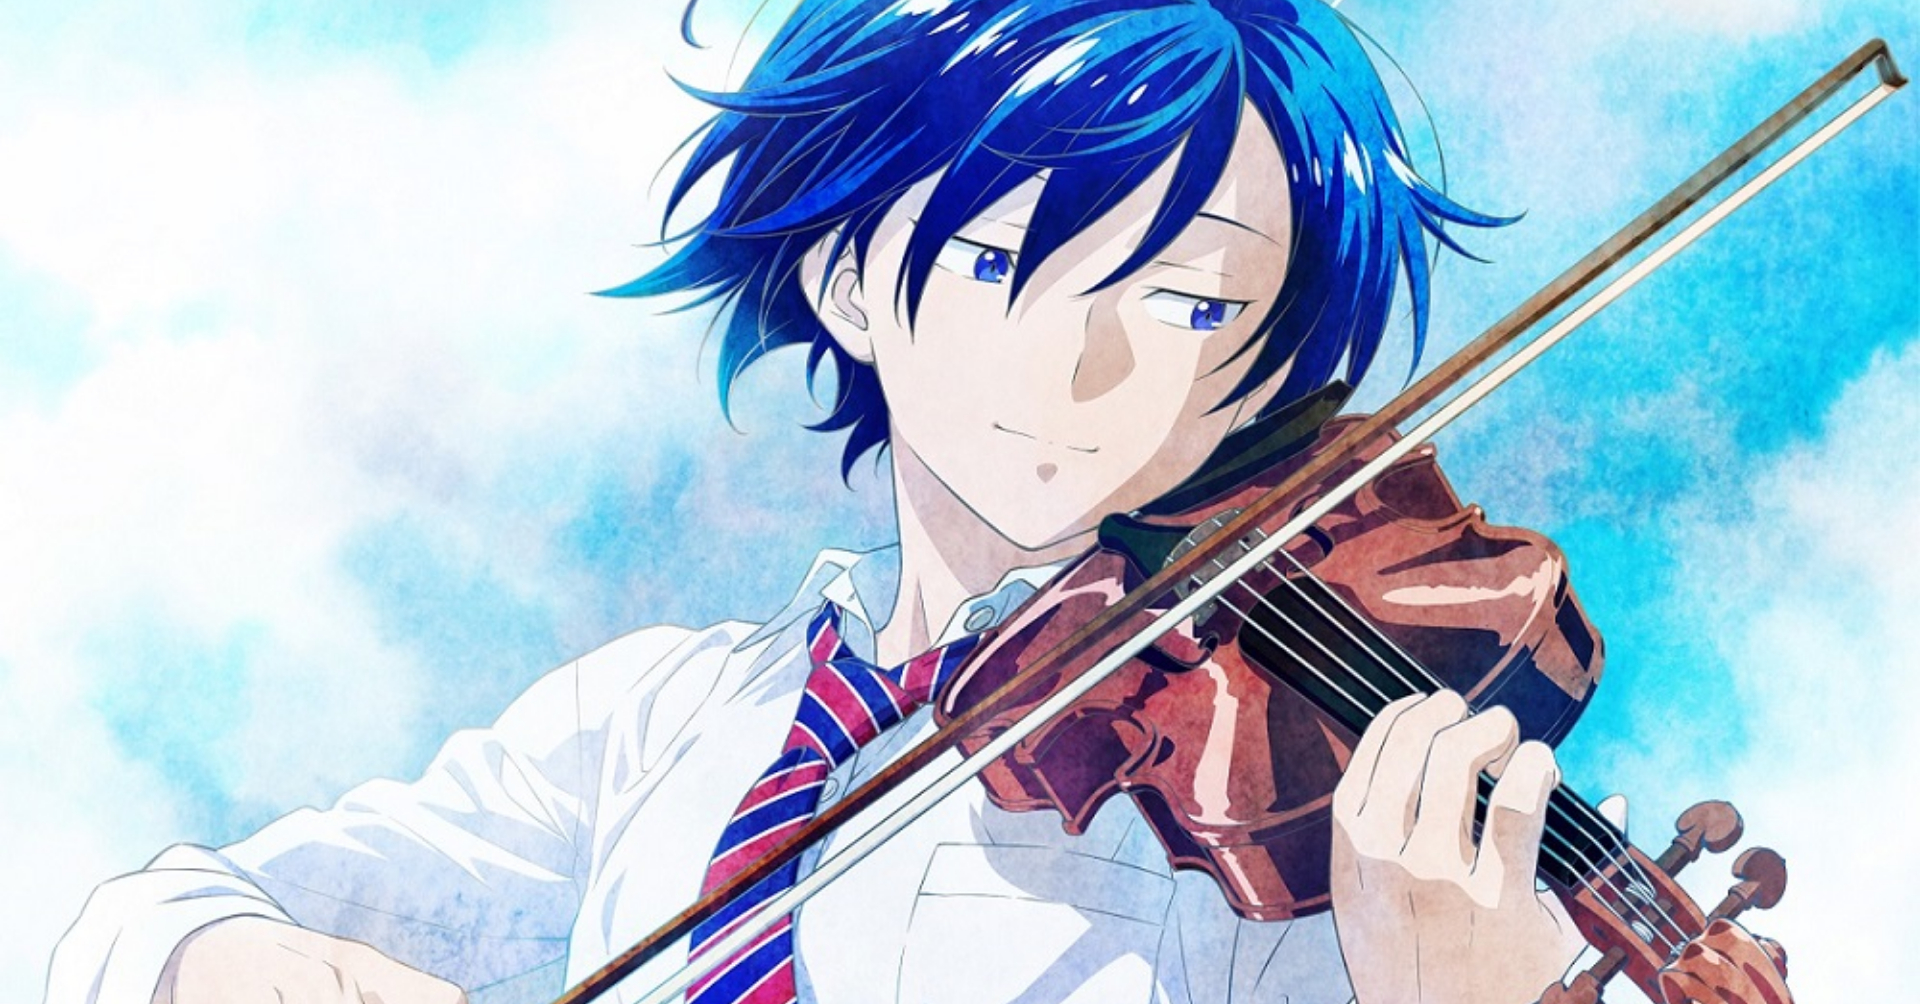 Violin Anime Animated Picture Codes and Downloads #130347078,781734947 |  Blingee.com